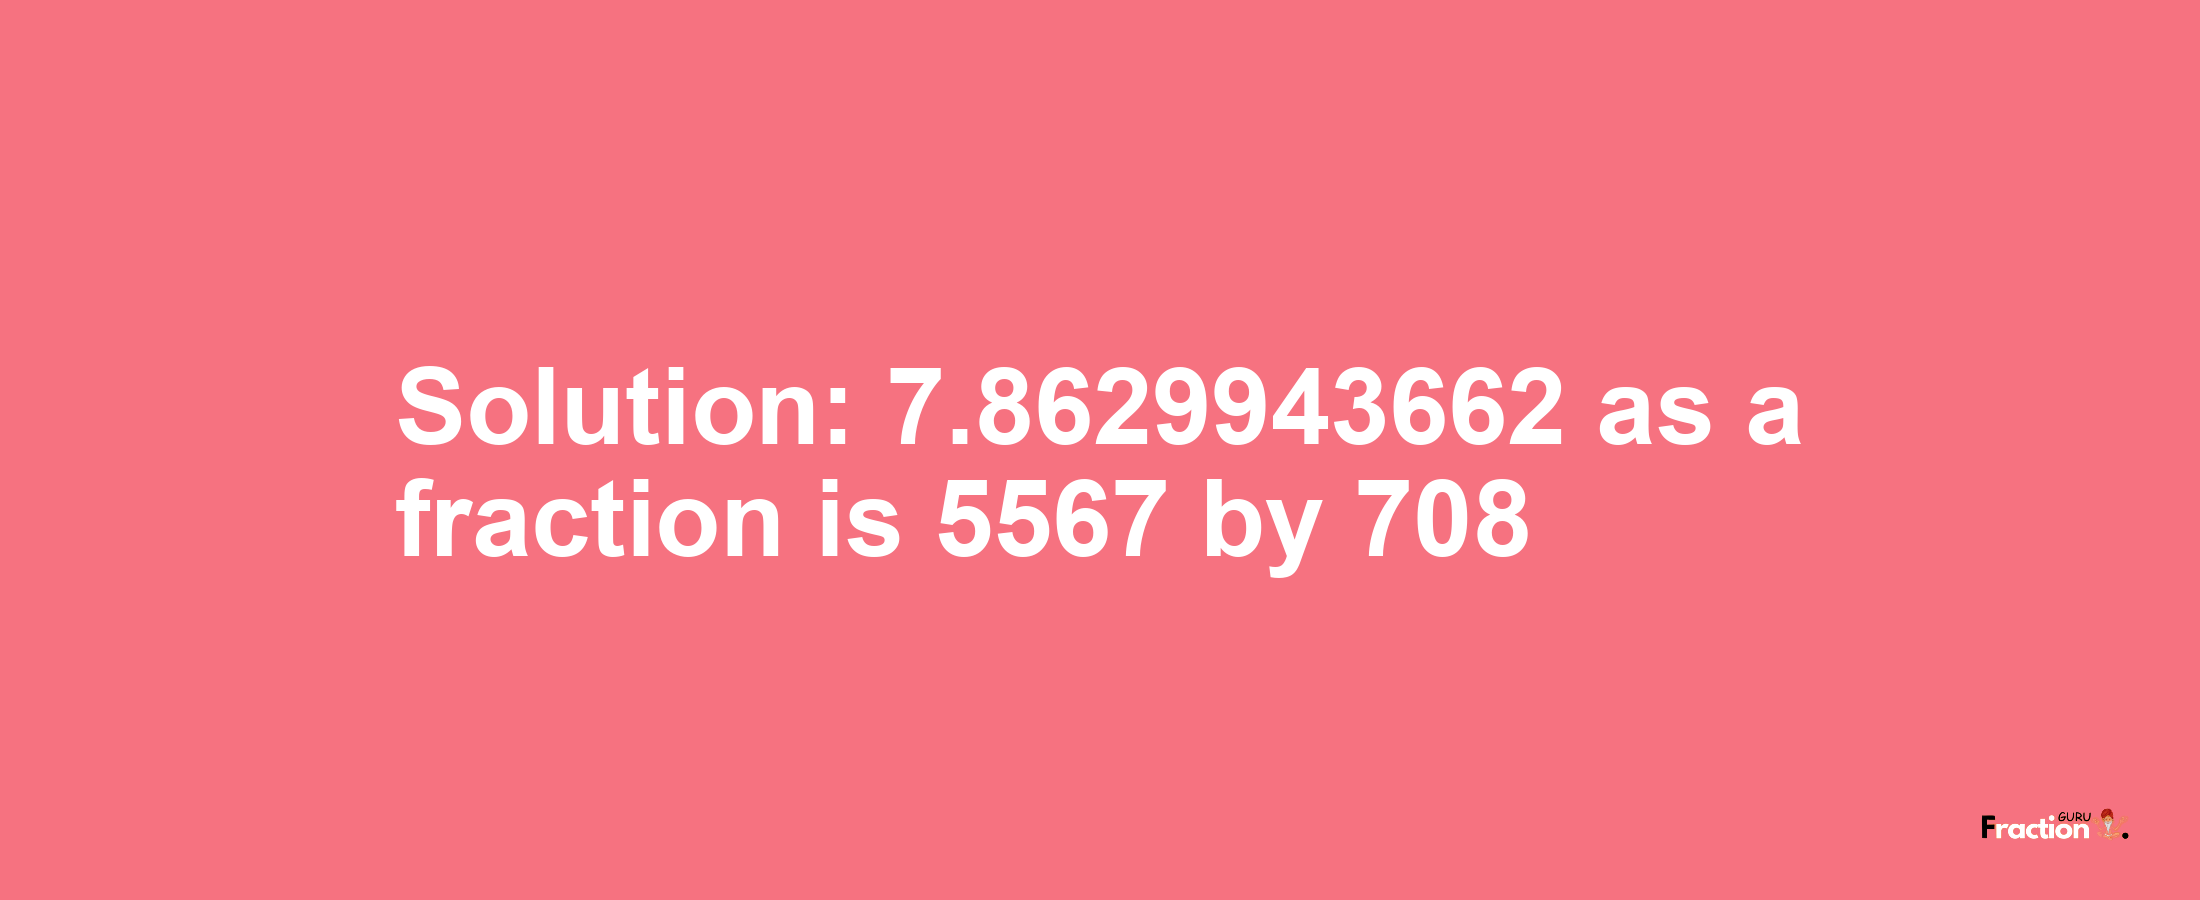 Solution:7.8629943662 as a fraction is 5567/708